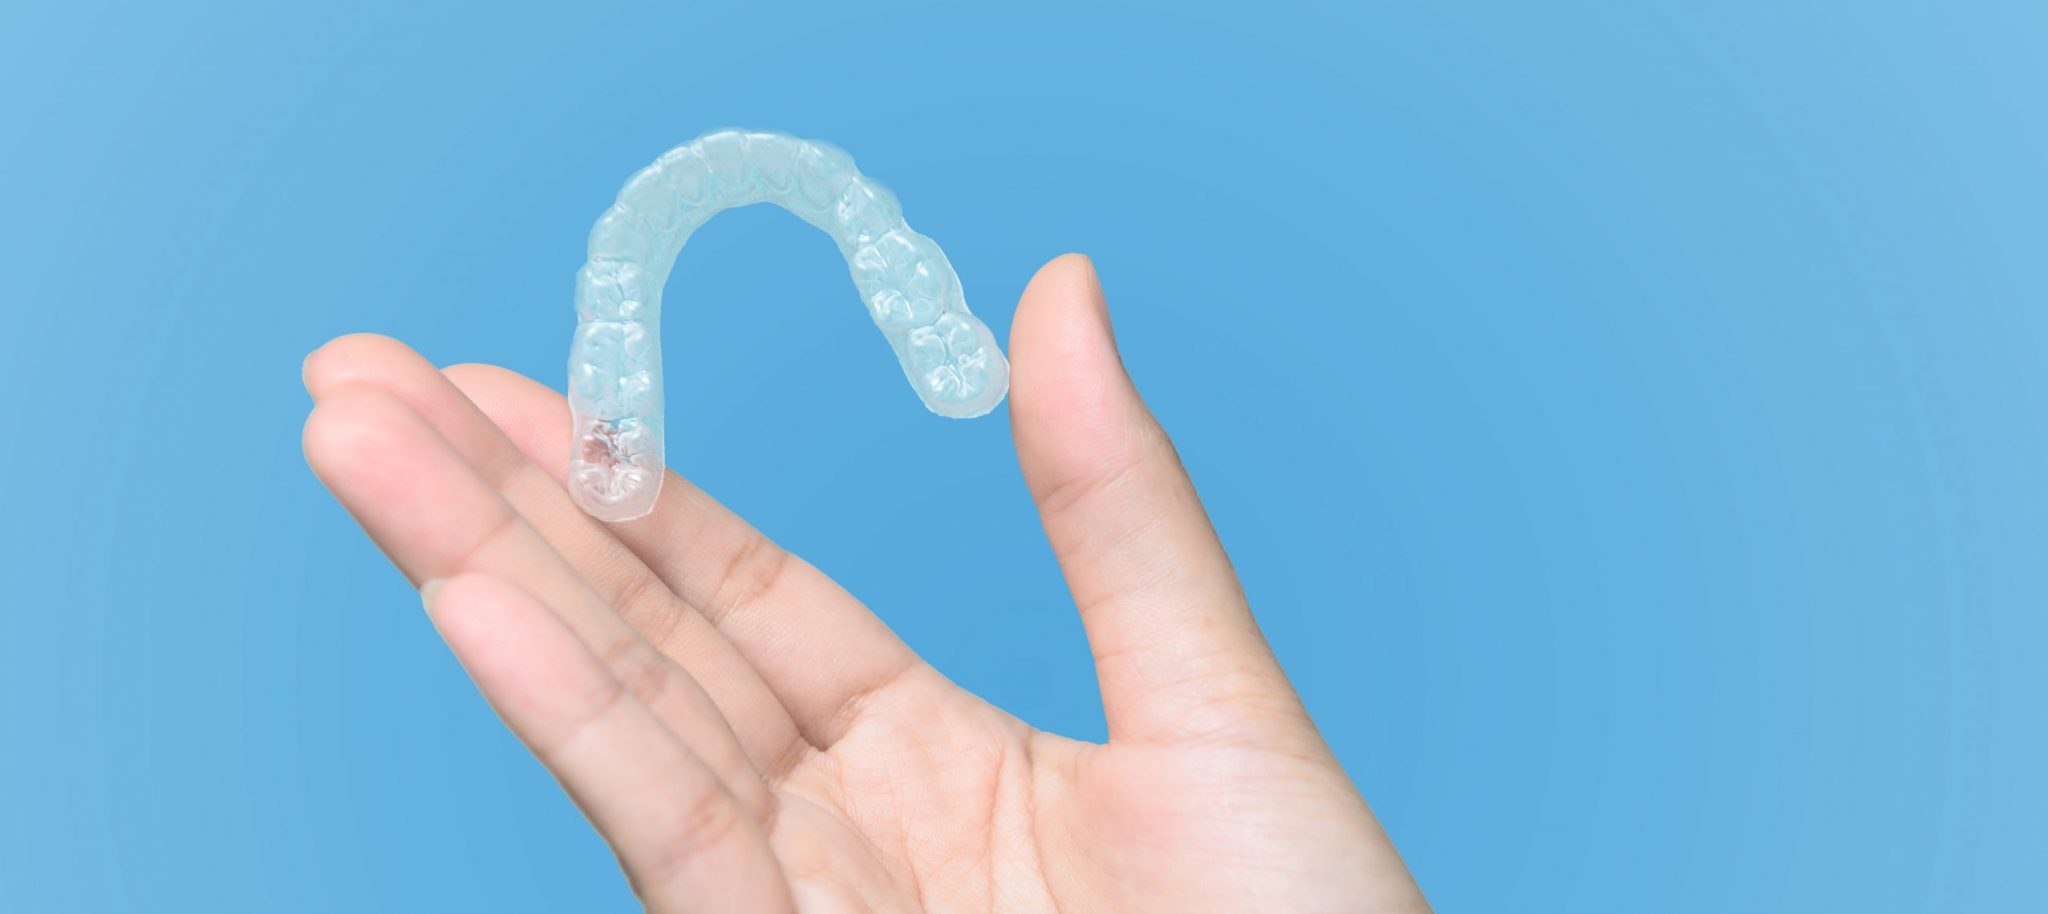 A hand holding up clear aligners